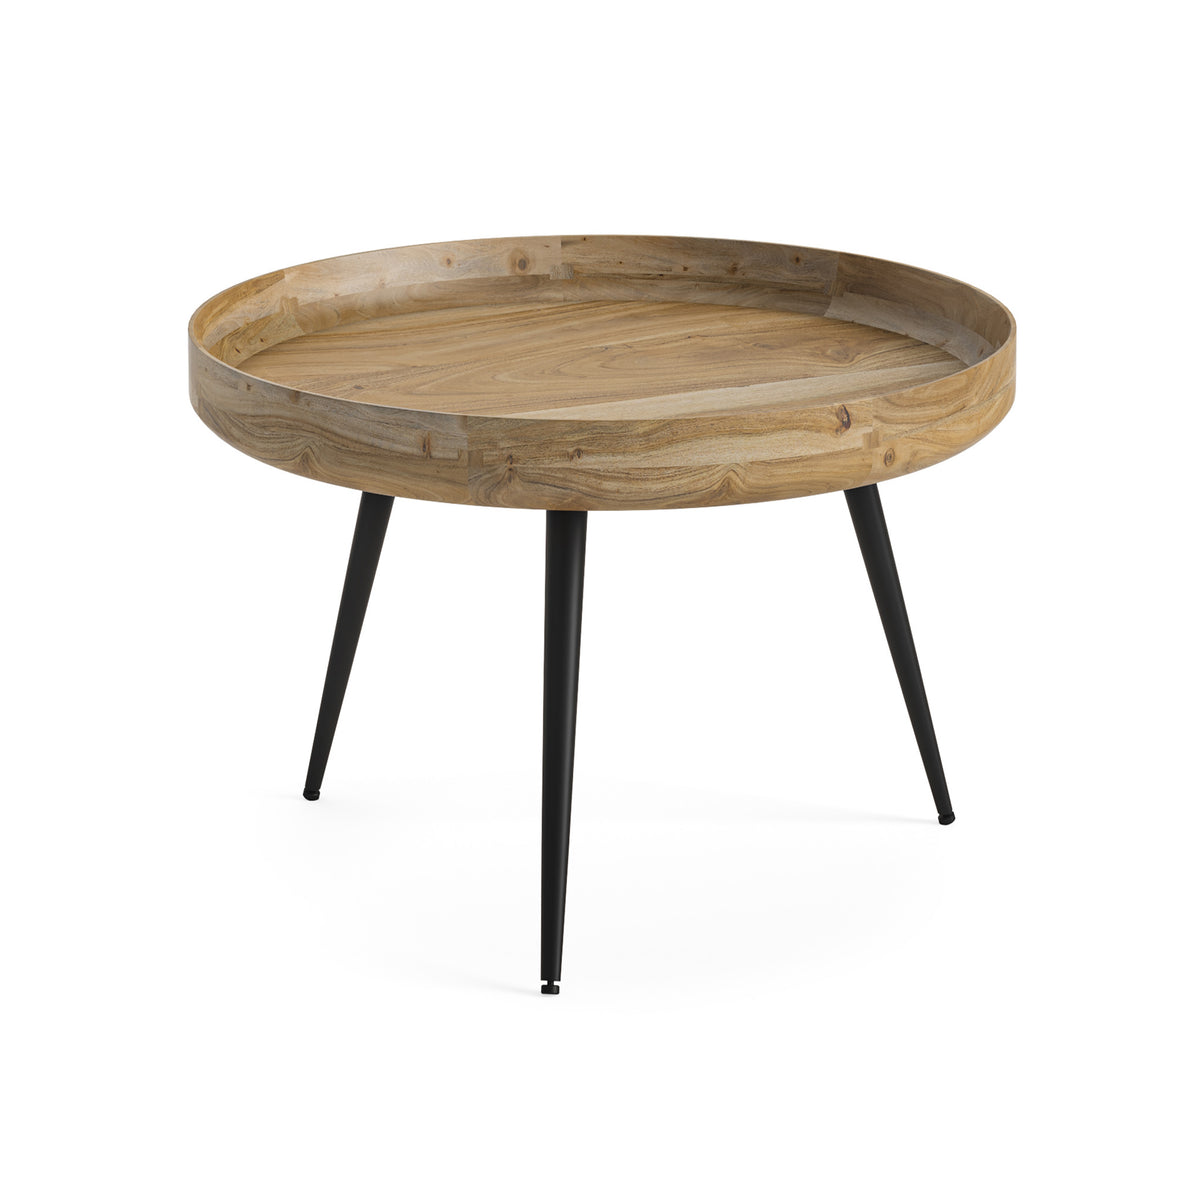 Boa 60cm Mango Wooden Round Natural Coffee Table from Roseland Furniture